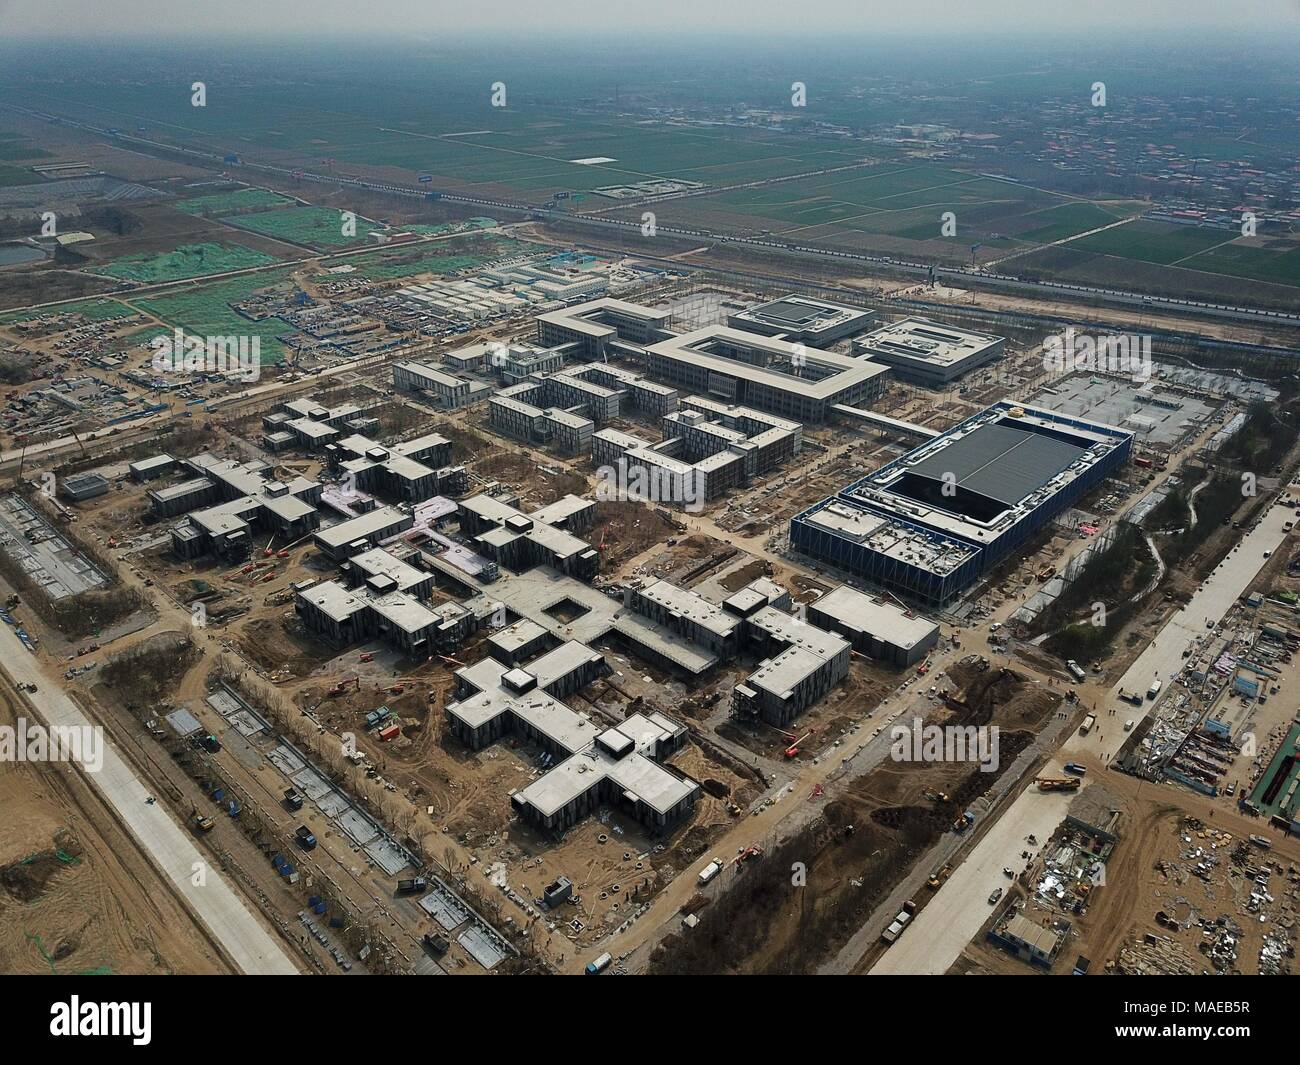 XIONGAN NEW AREA, April 1, 2018 (Xinhua) -- This aerial photo taken on March 30, 2018 shows construction site of the Xiongan public services center in Xiongan New Area, north China's Hebei Province. Xiongan New Area, established on April 1, 2017,It is the third new area of national significance after the Shenzhen Special Economic Zone and the Shanghai Pudong New Area. China aims to build it as a low-carbon, intelligent, livable and globally influential city where people and nature exist in harmony. (Xinhua/Sh Credit: Xinhua/Alamy Live News Stock Photo